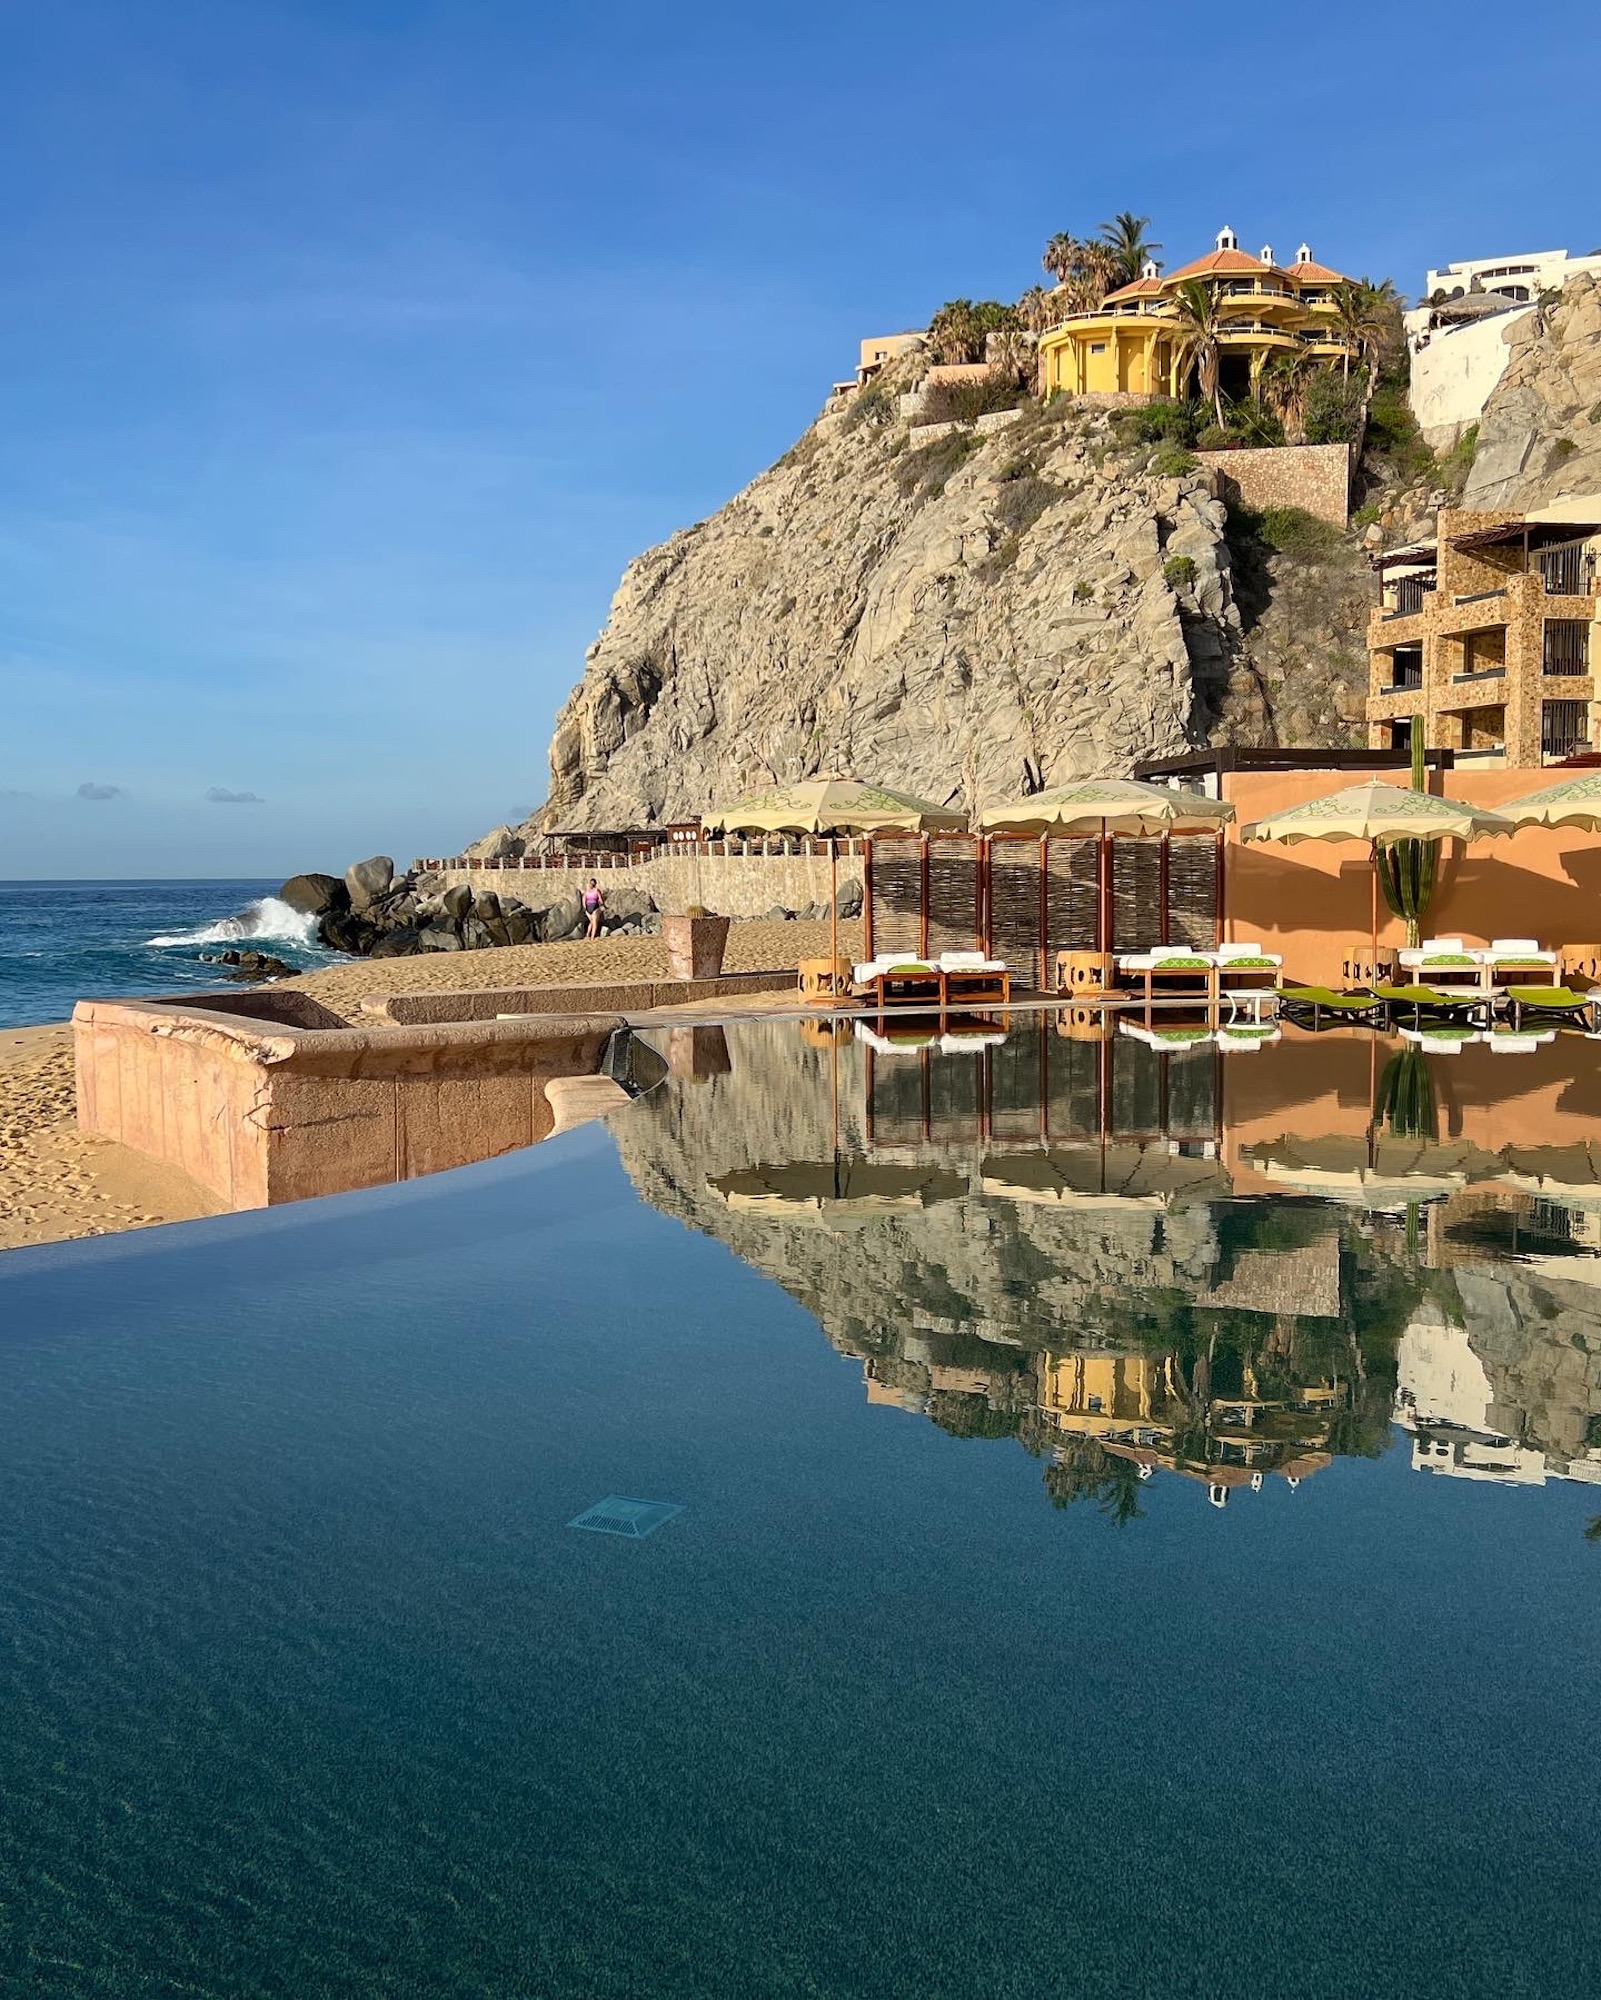 View from an infinity pool at the Waldorf Astoria Pedregal in Los Cabos, Mexico - Bookable with Hilton Honors points and Free Night Rewards.